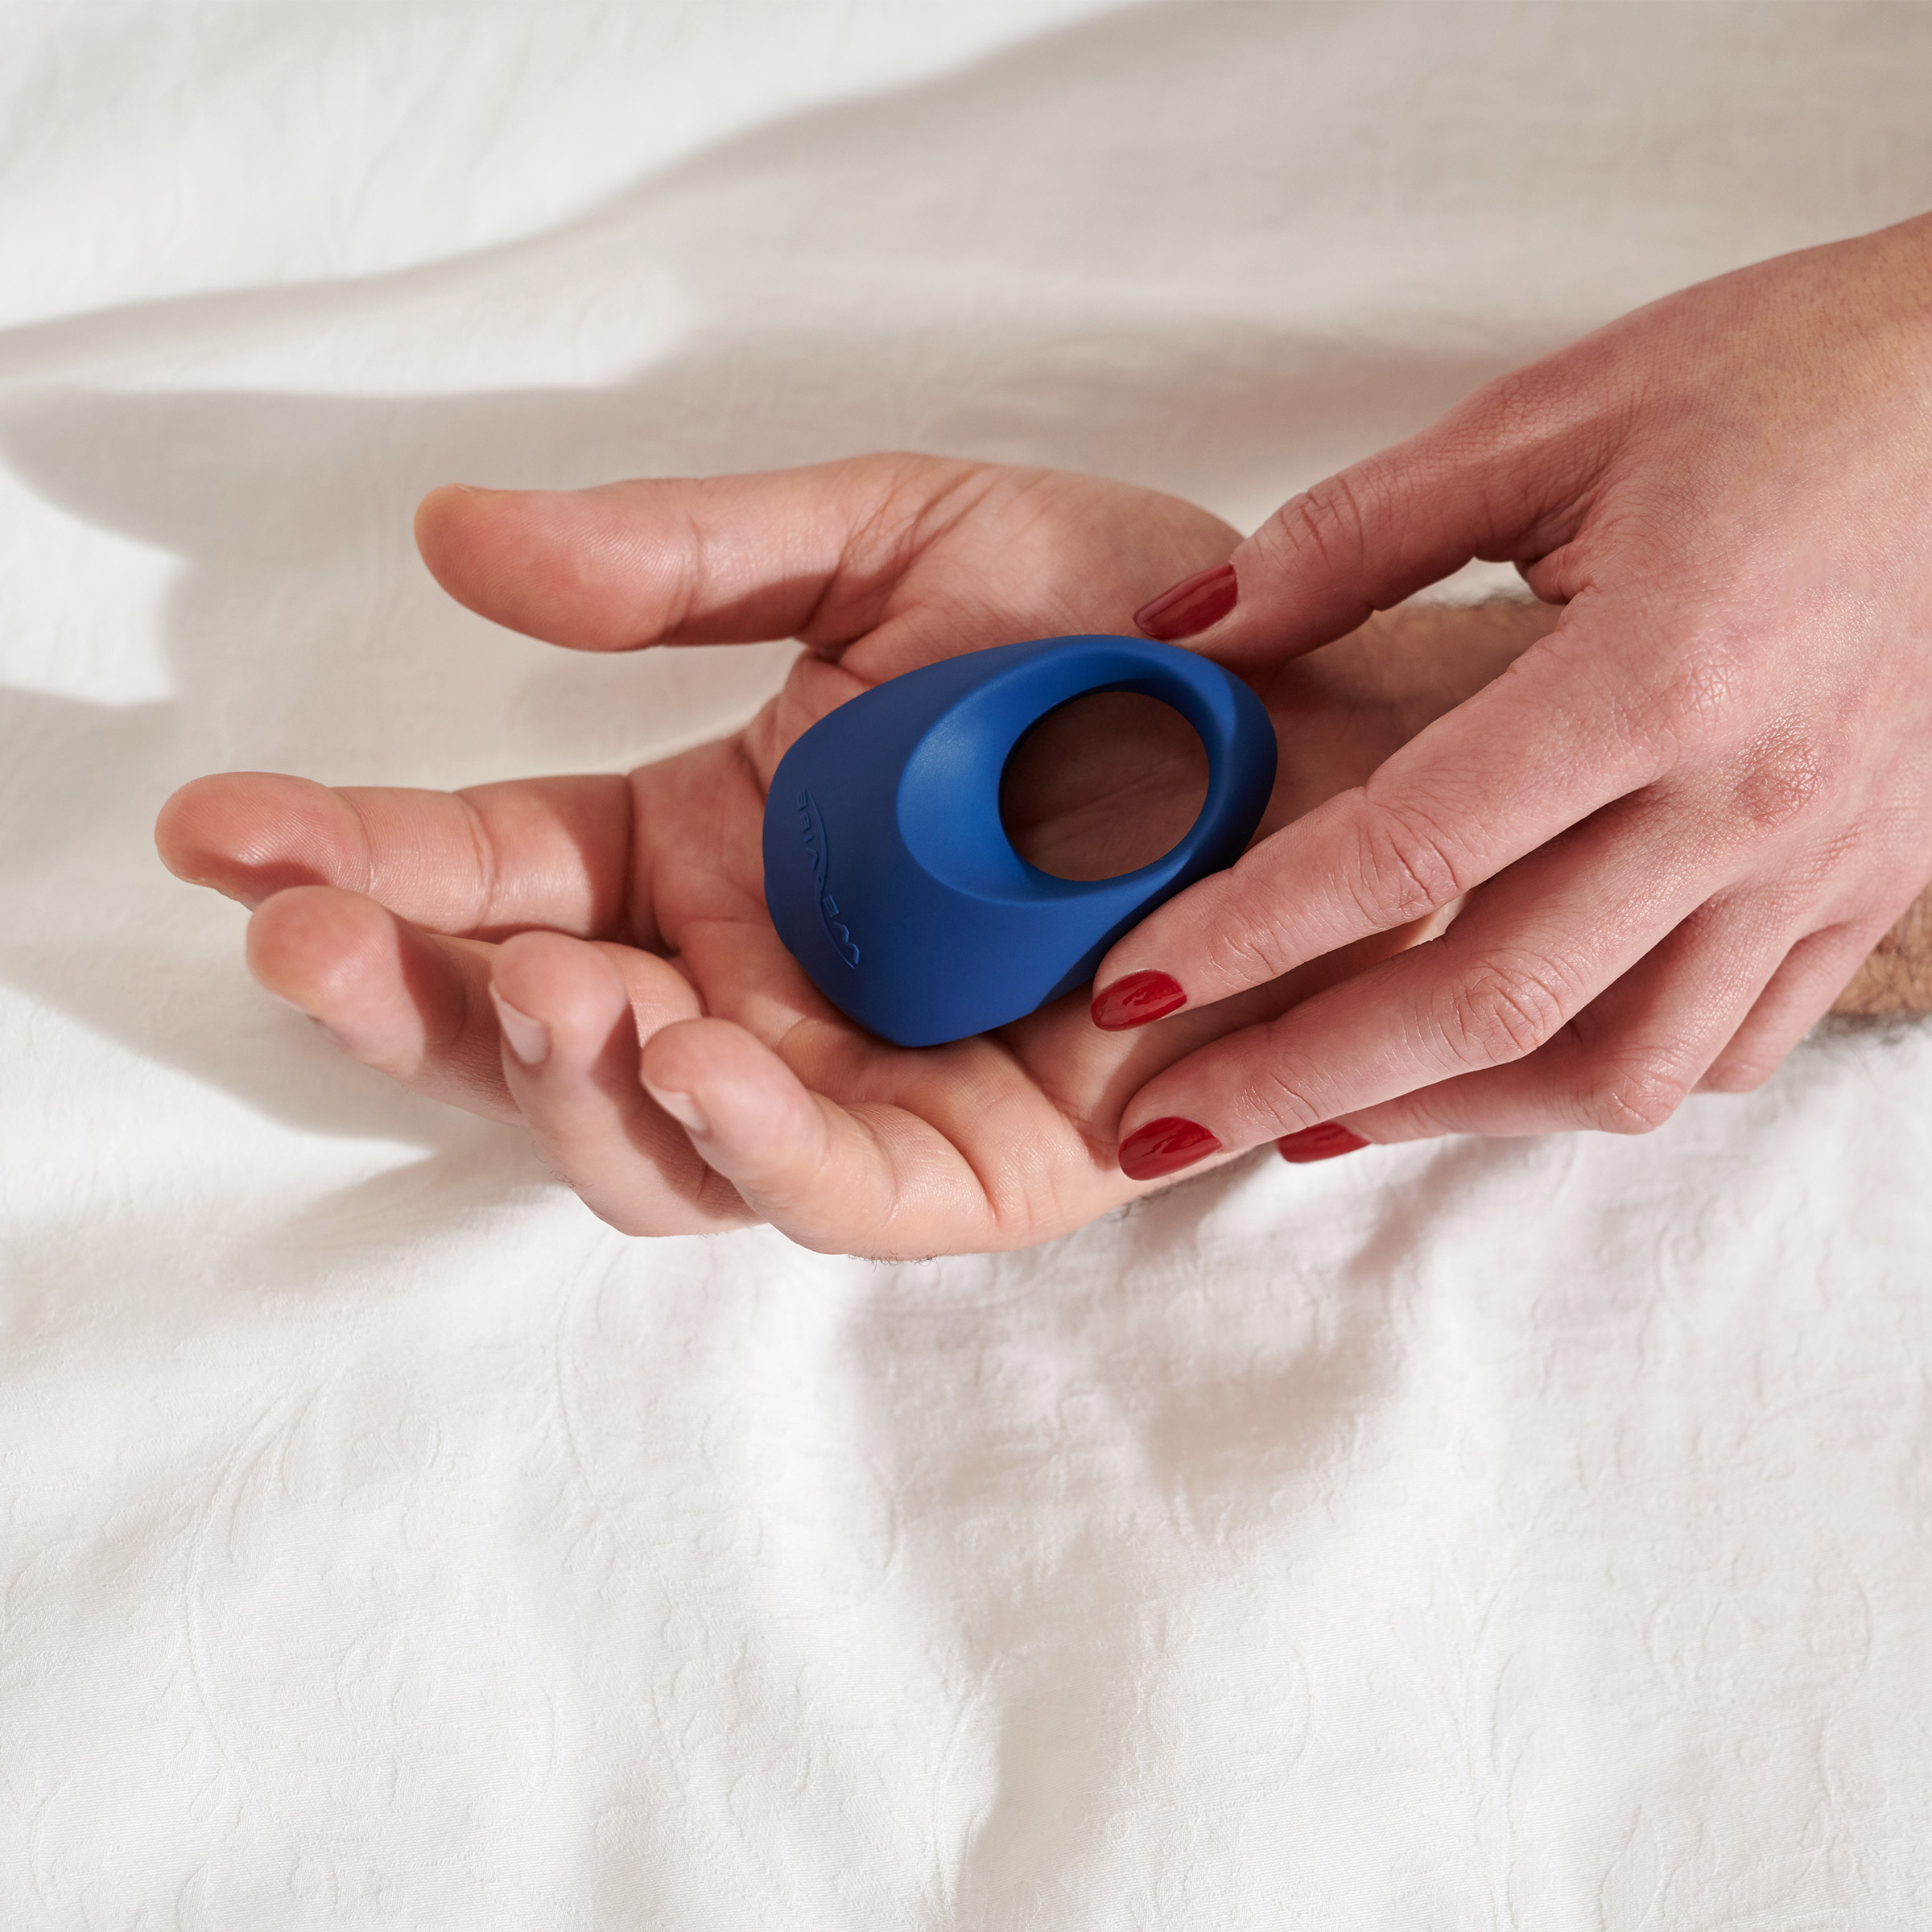 We-Vibe Pivot Wearable Vibrating Ring with Remote and App, Blue - image 3 of 9